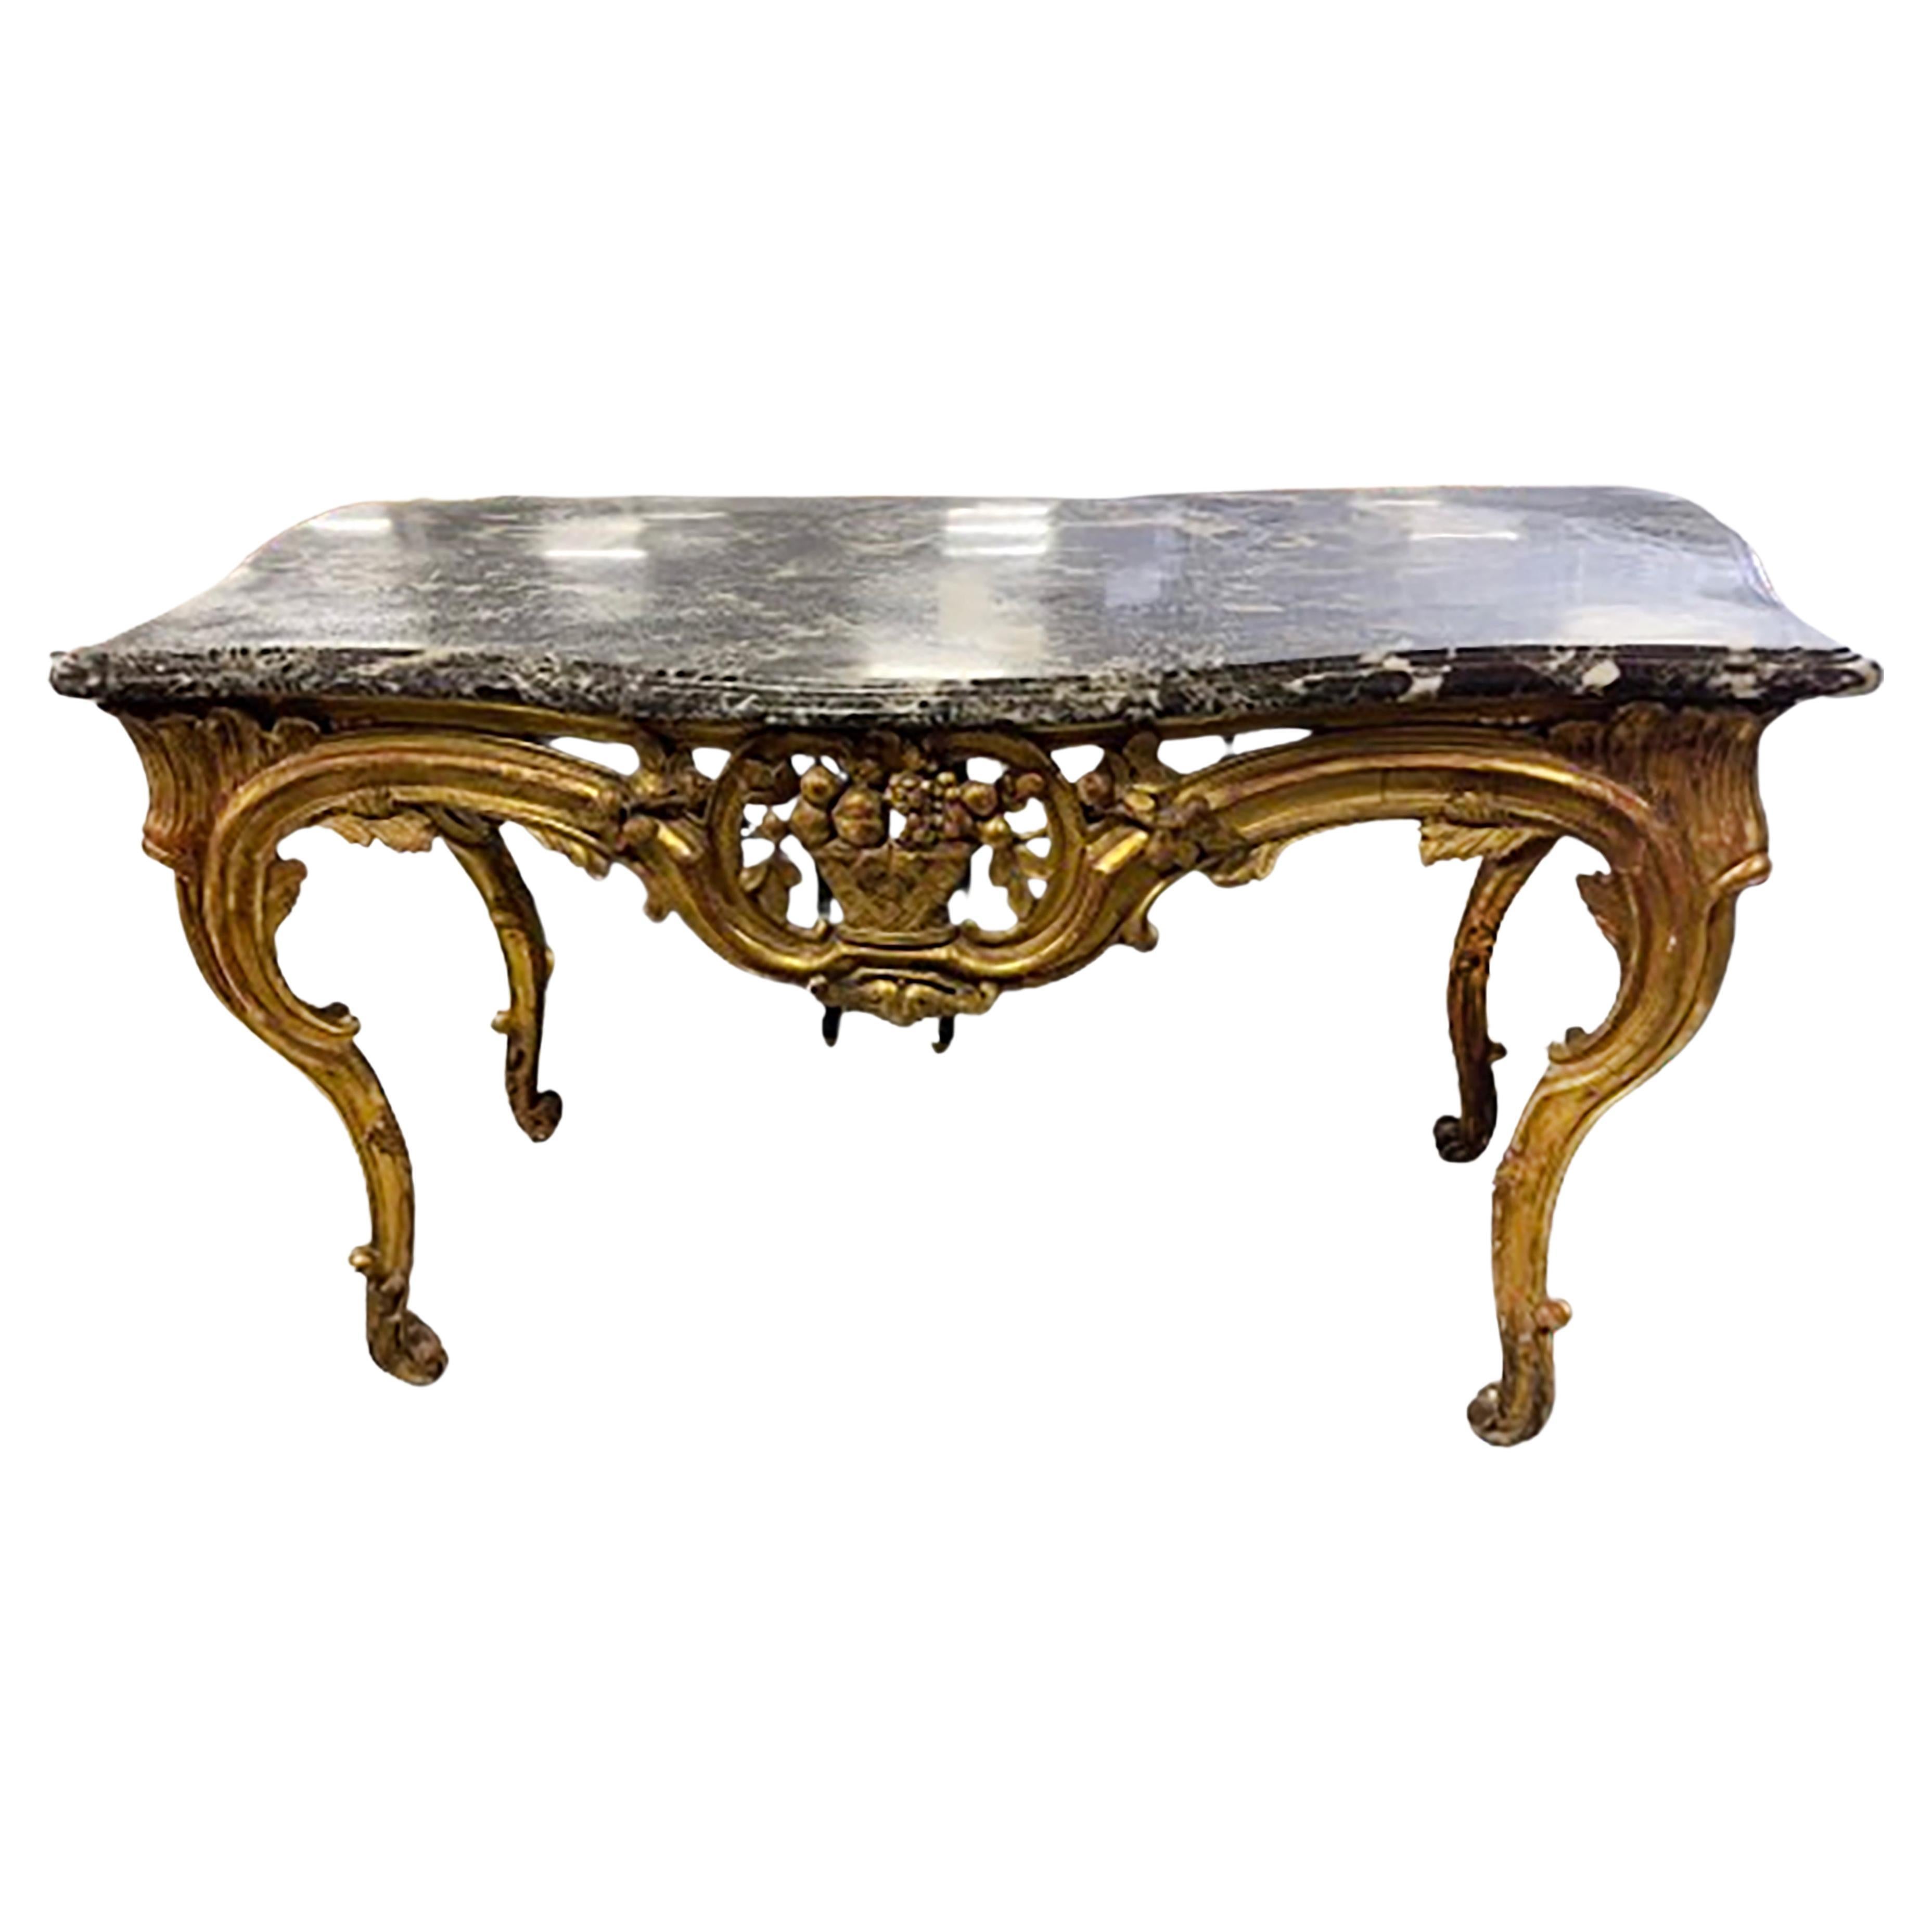 18th Century French Regence Giltwood Console with Marble Top